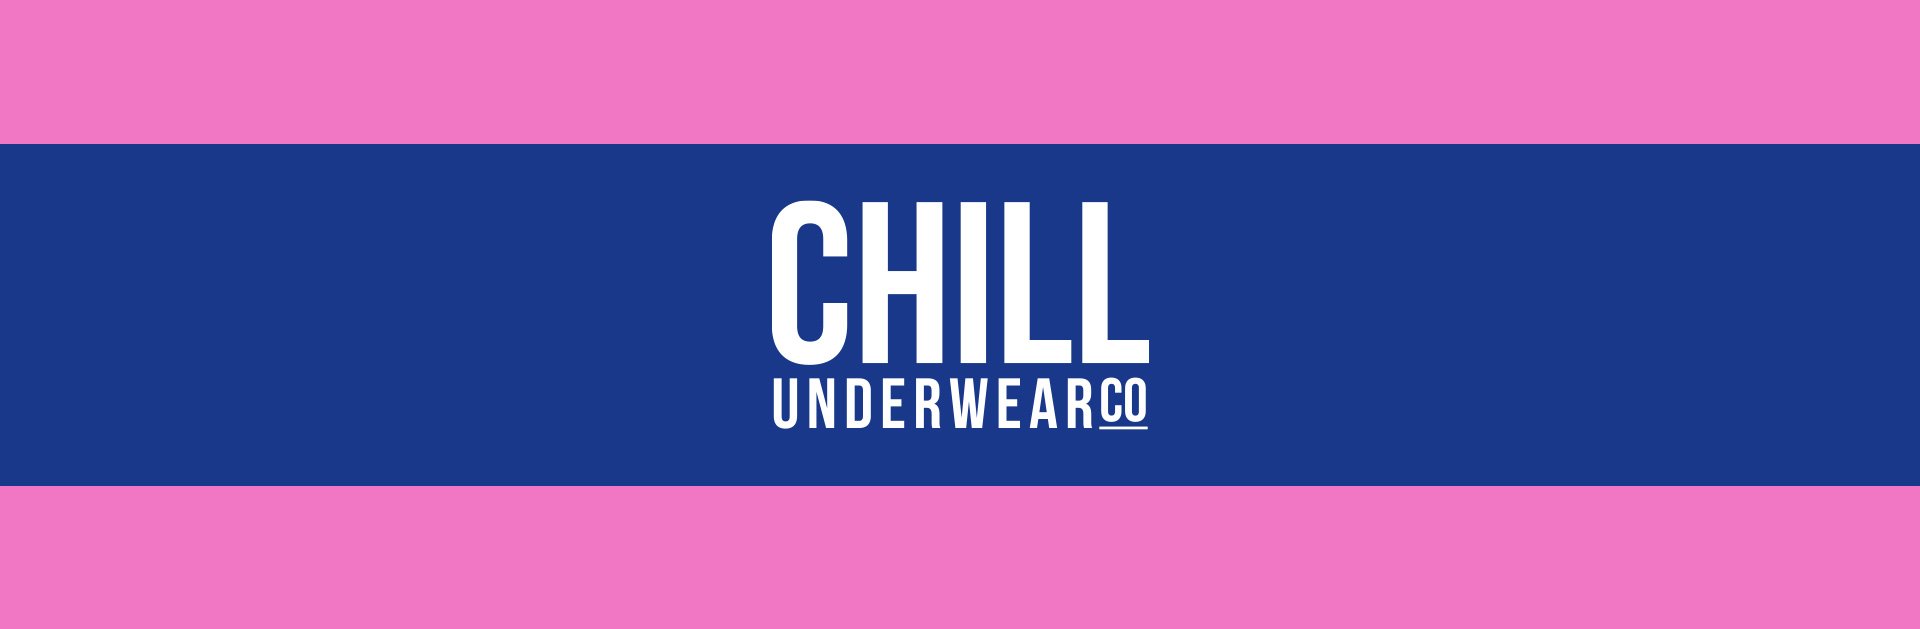 Chill Collection Banner